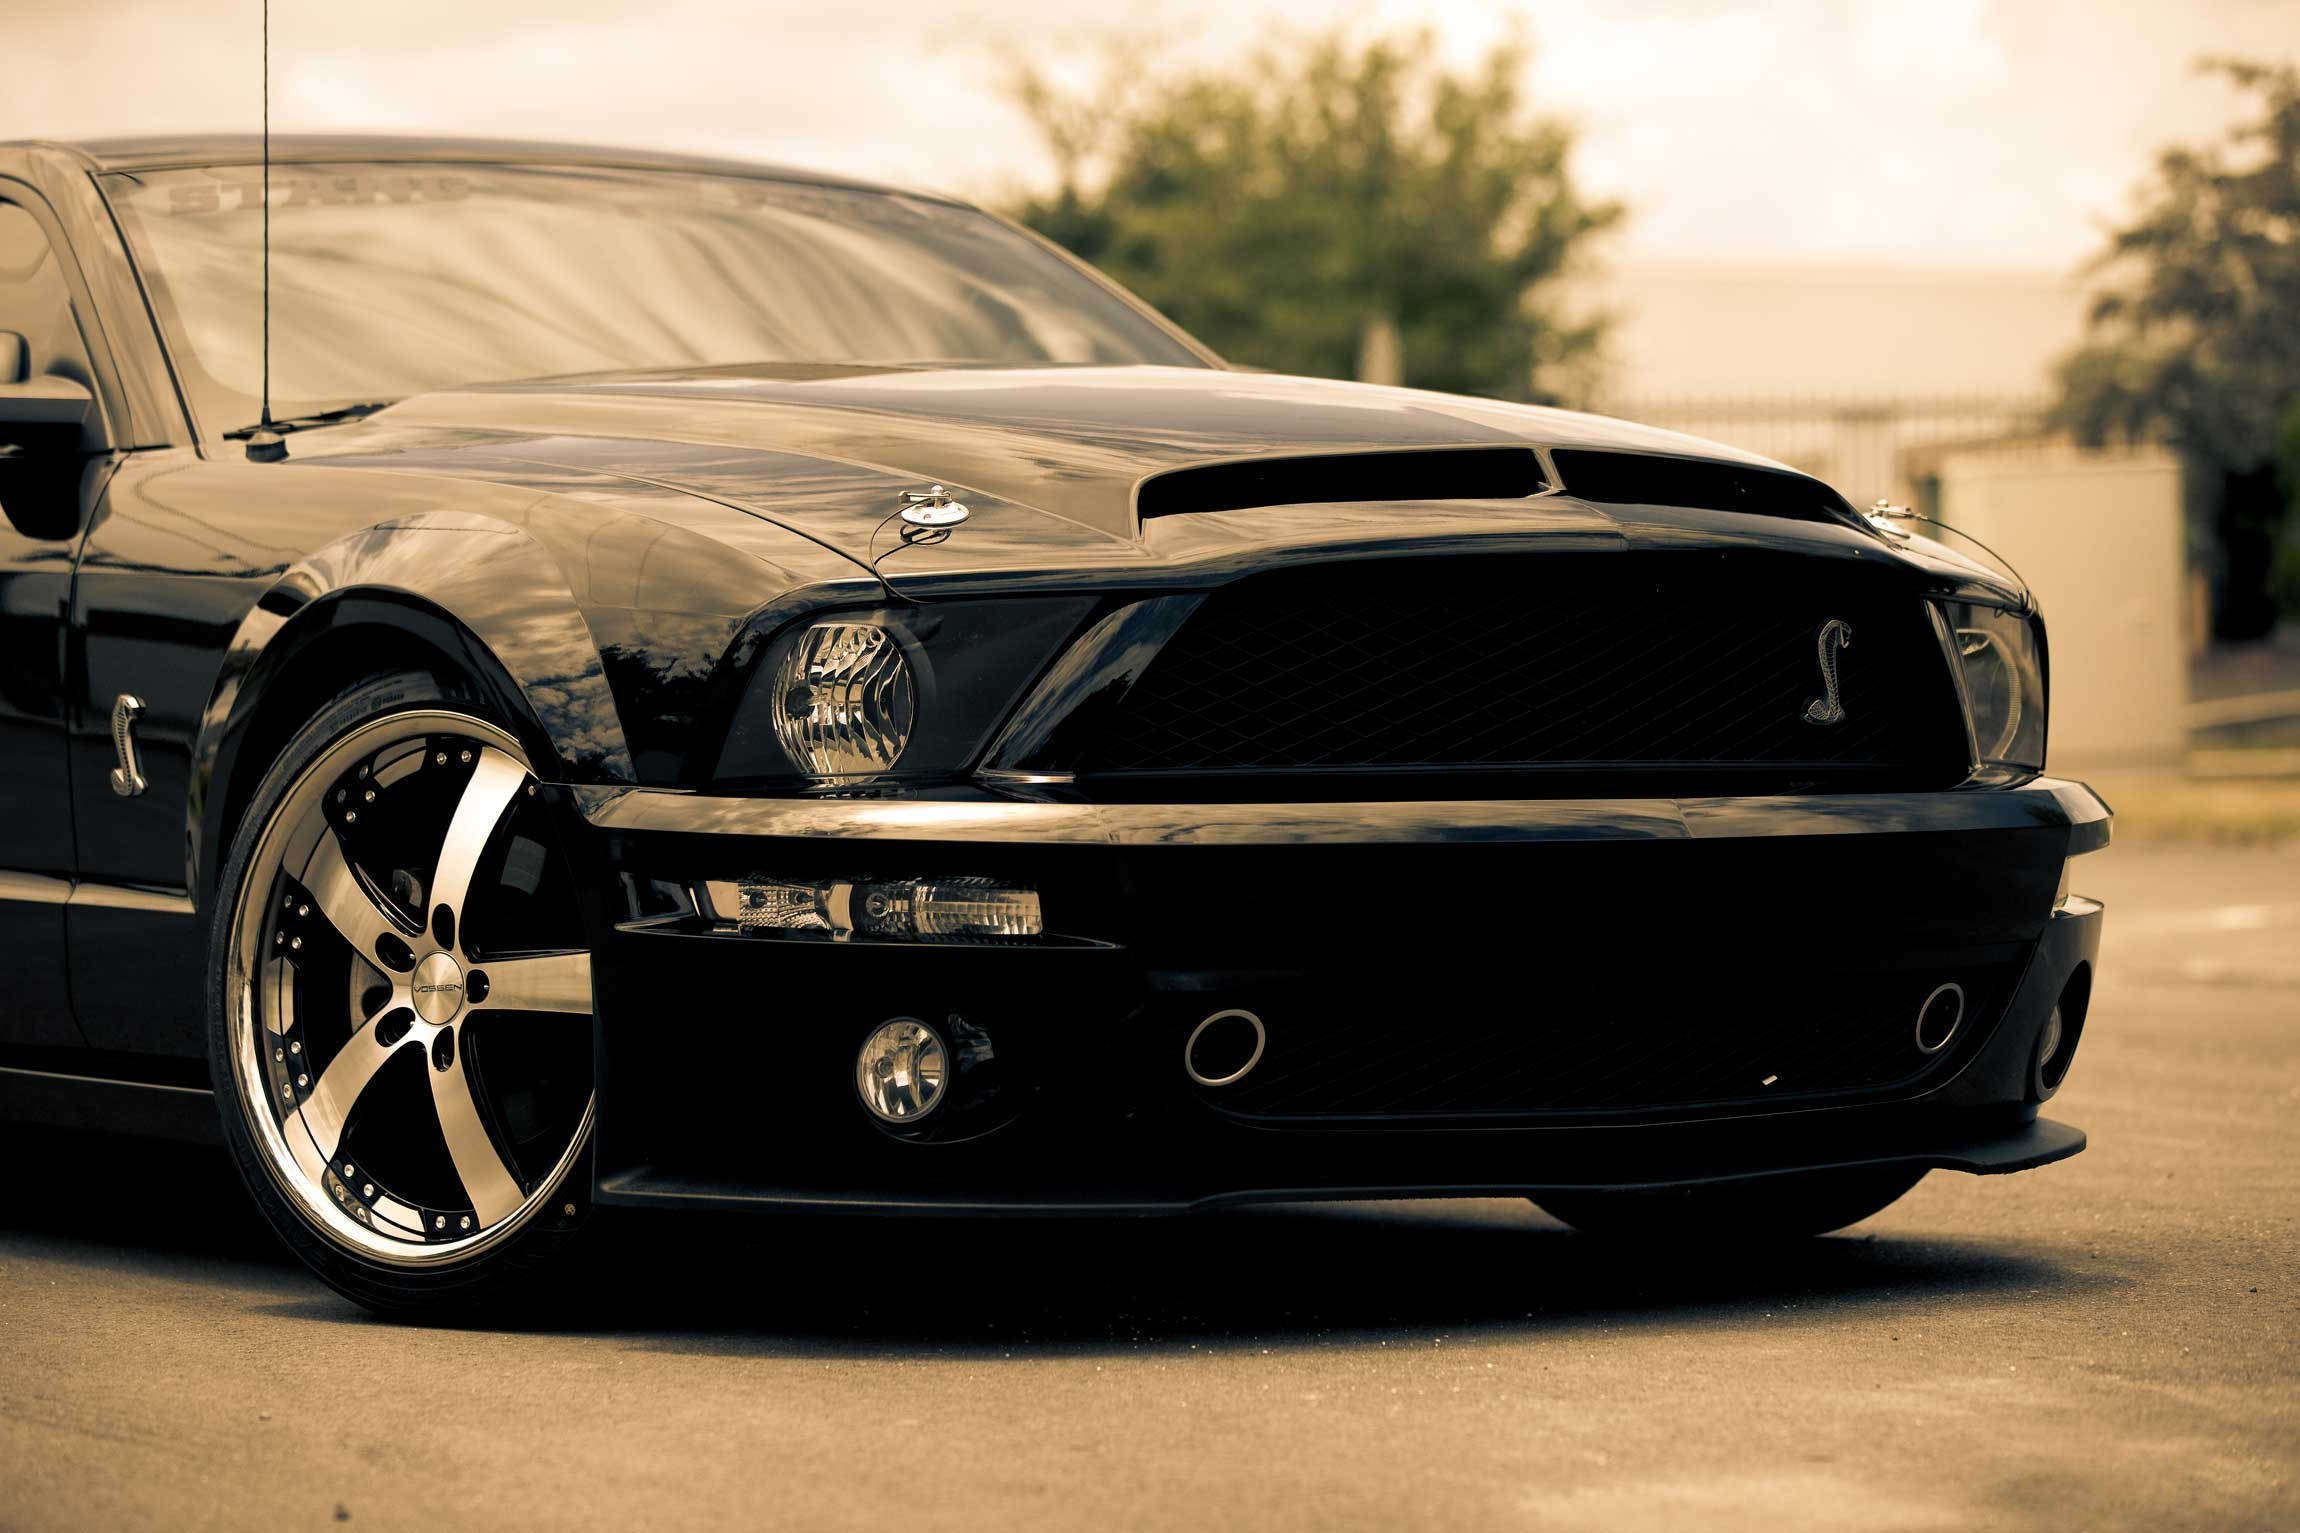 Black Ford Mustang HD wallpapers free download  Wallpaperbetter